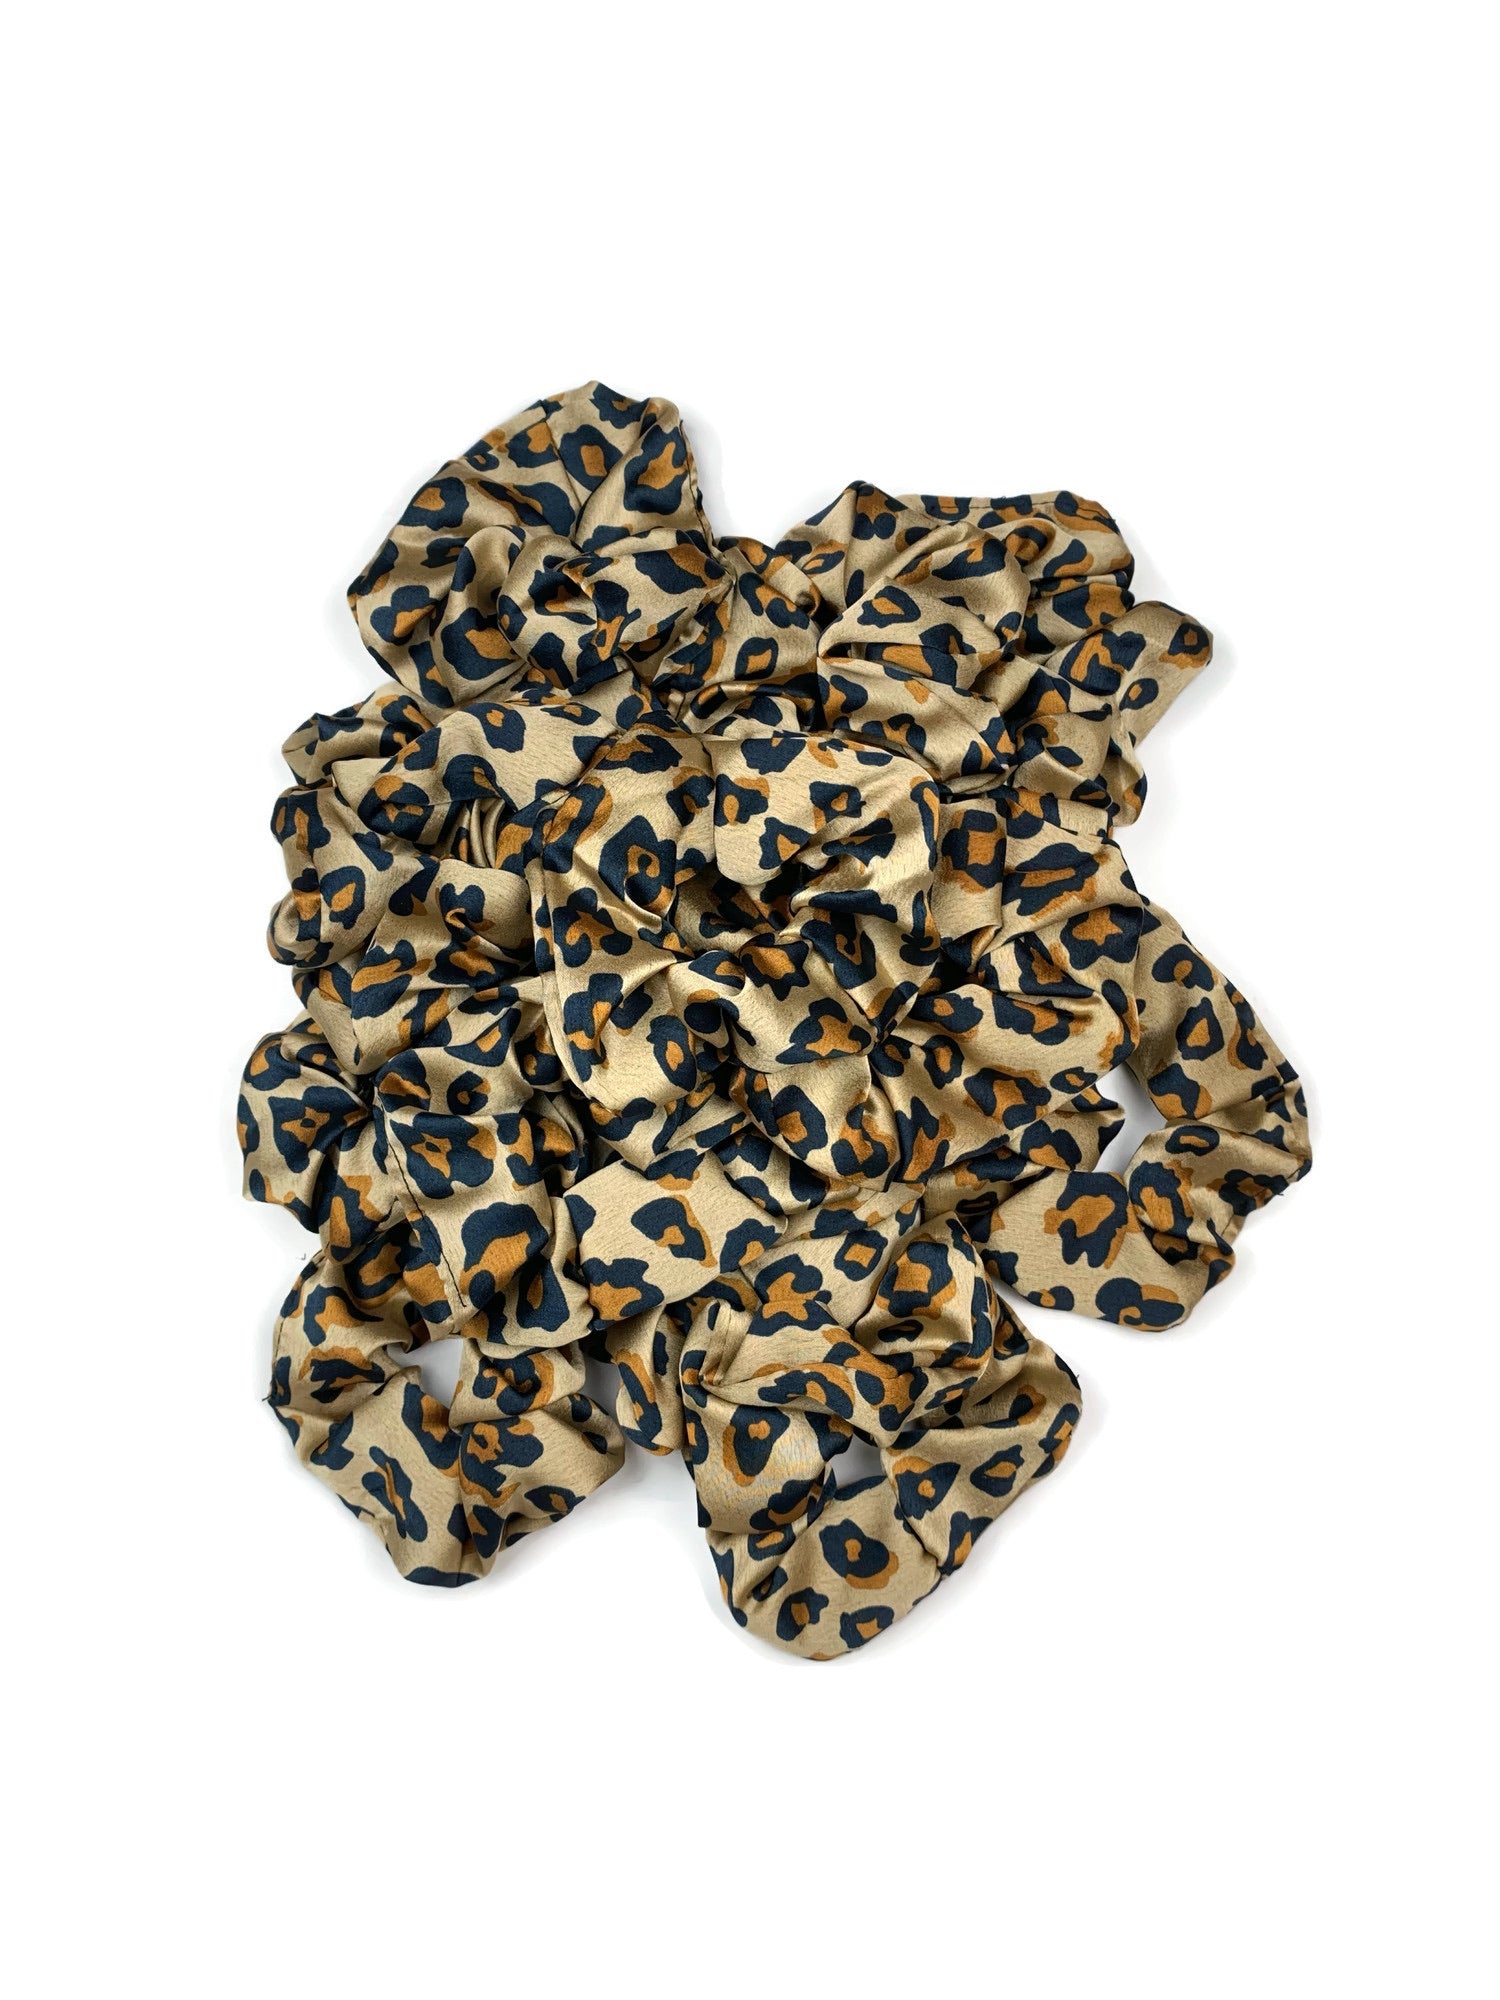 Tan and Gold Leopard Thank You Satin Scrunchie Filler Pack, 1 per pack. Now available with Logo Sticker Add On Option!